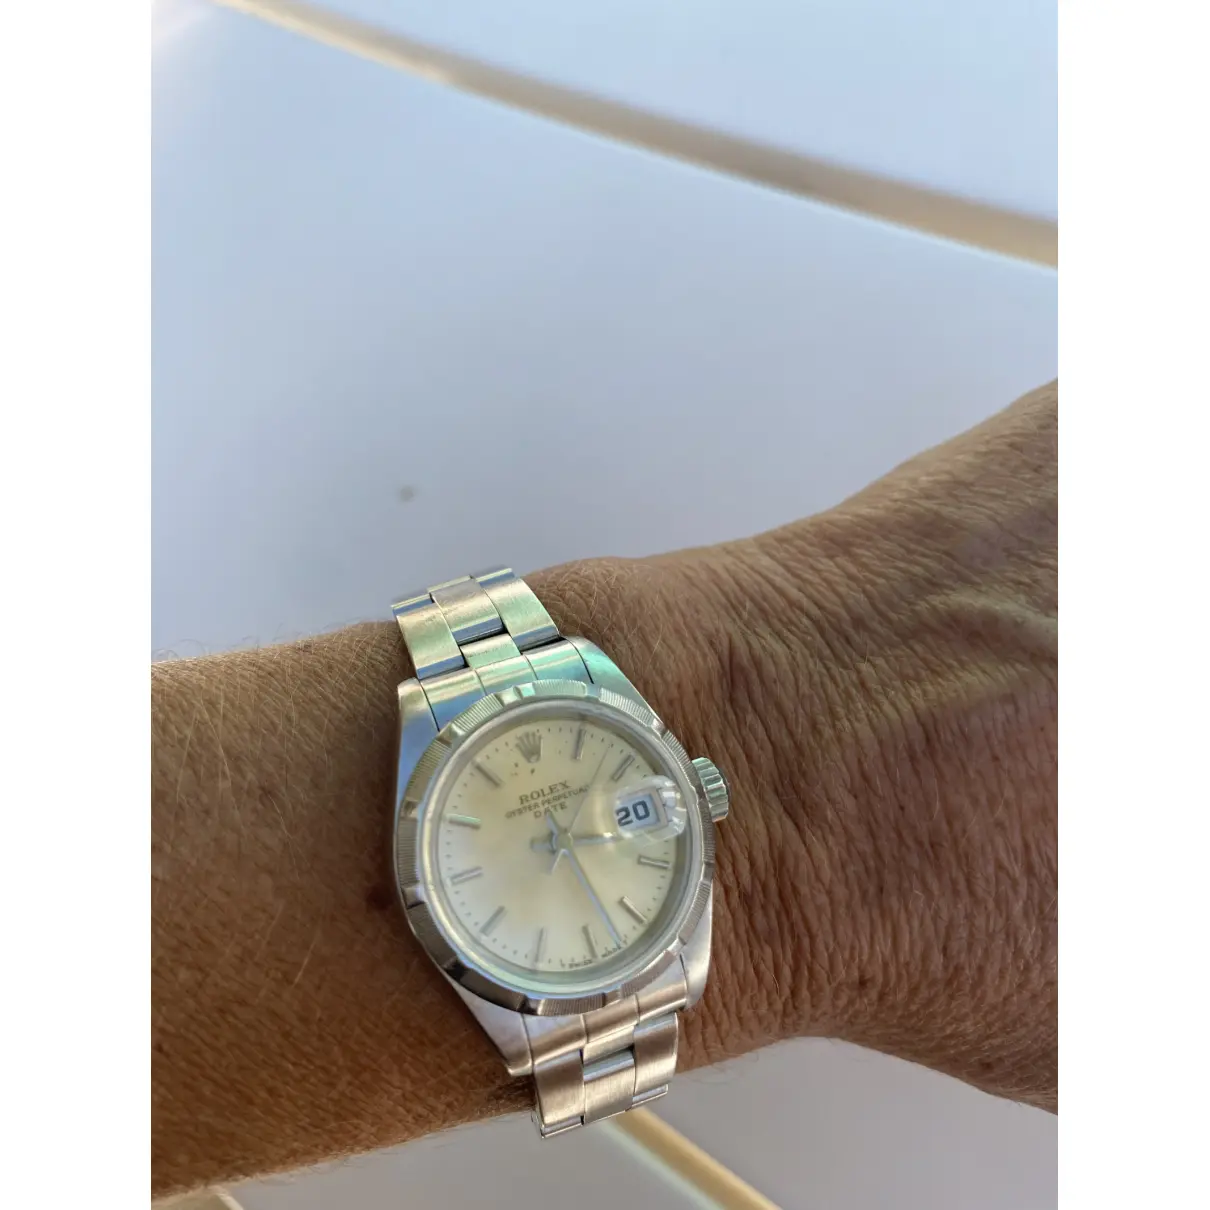 Lady Oyster Perpetual 26mm watch Rolex - Vintage